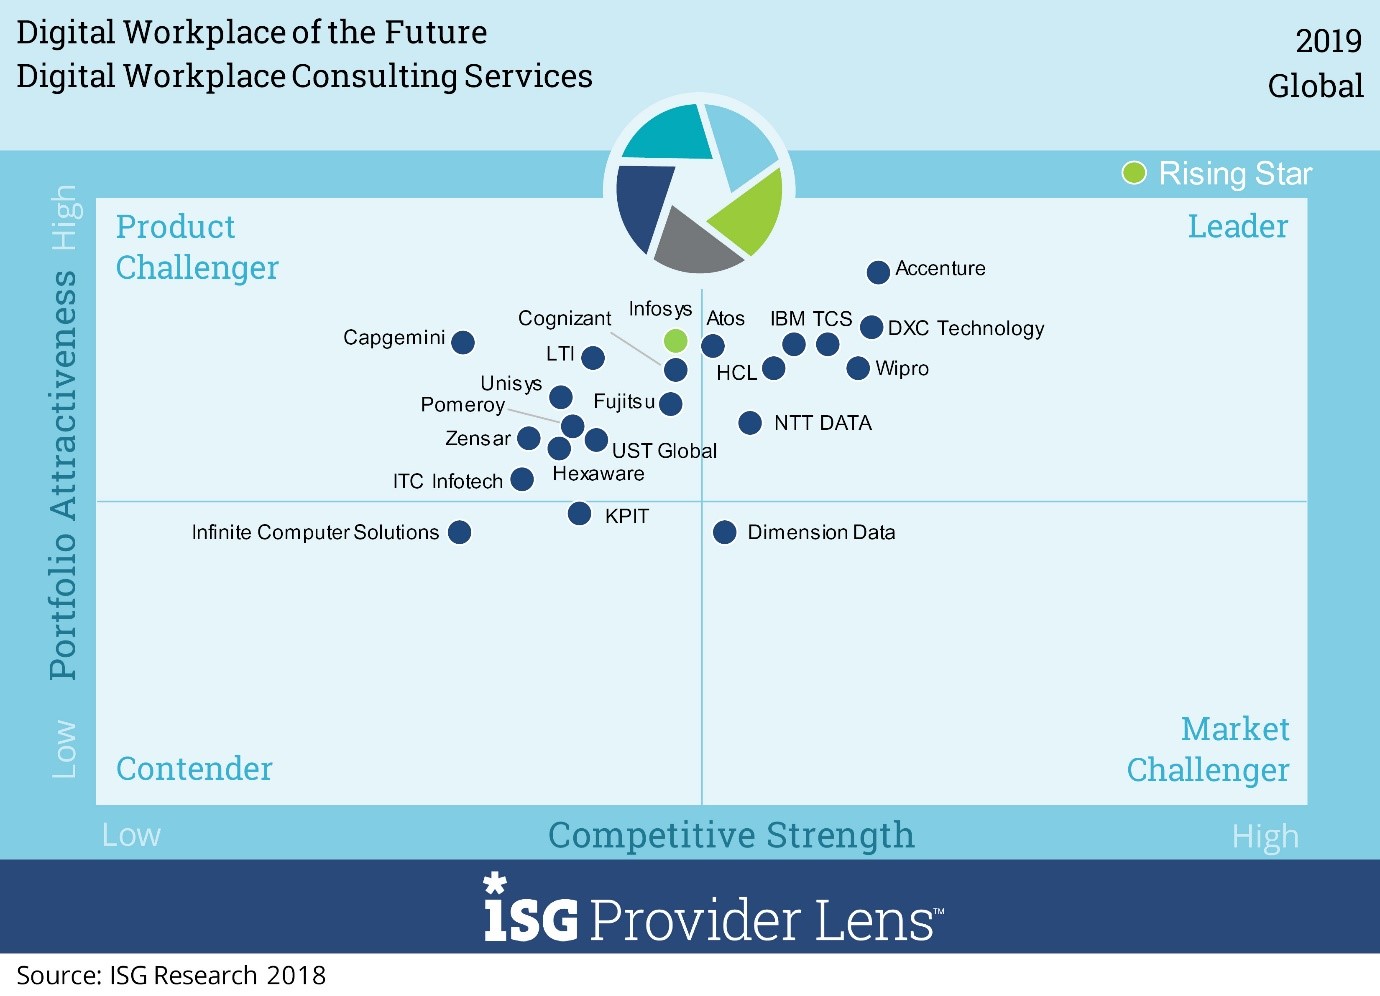 Wipro recognized as market leader in five different quadrants focused on digital workplace services by ISG Provider lens™ Digital Workplace of the Future 2019